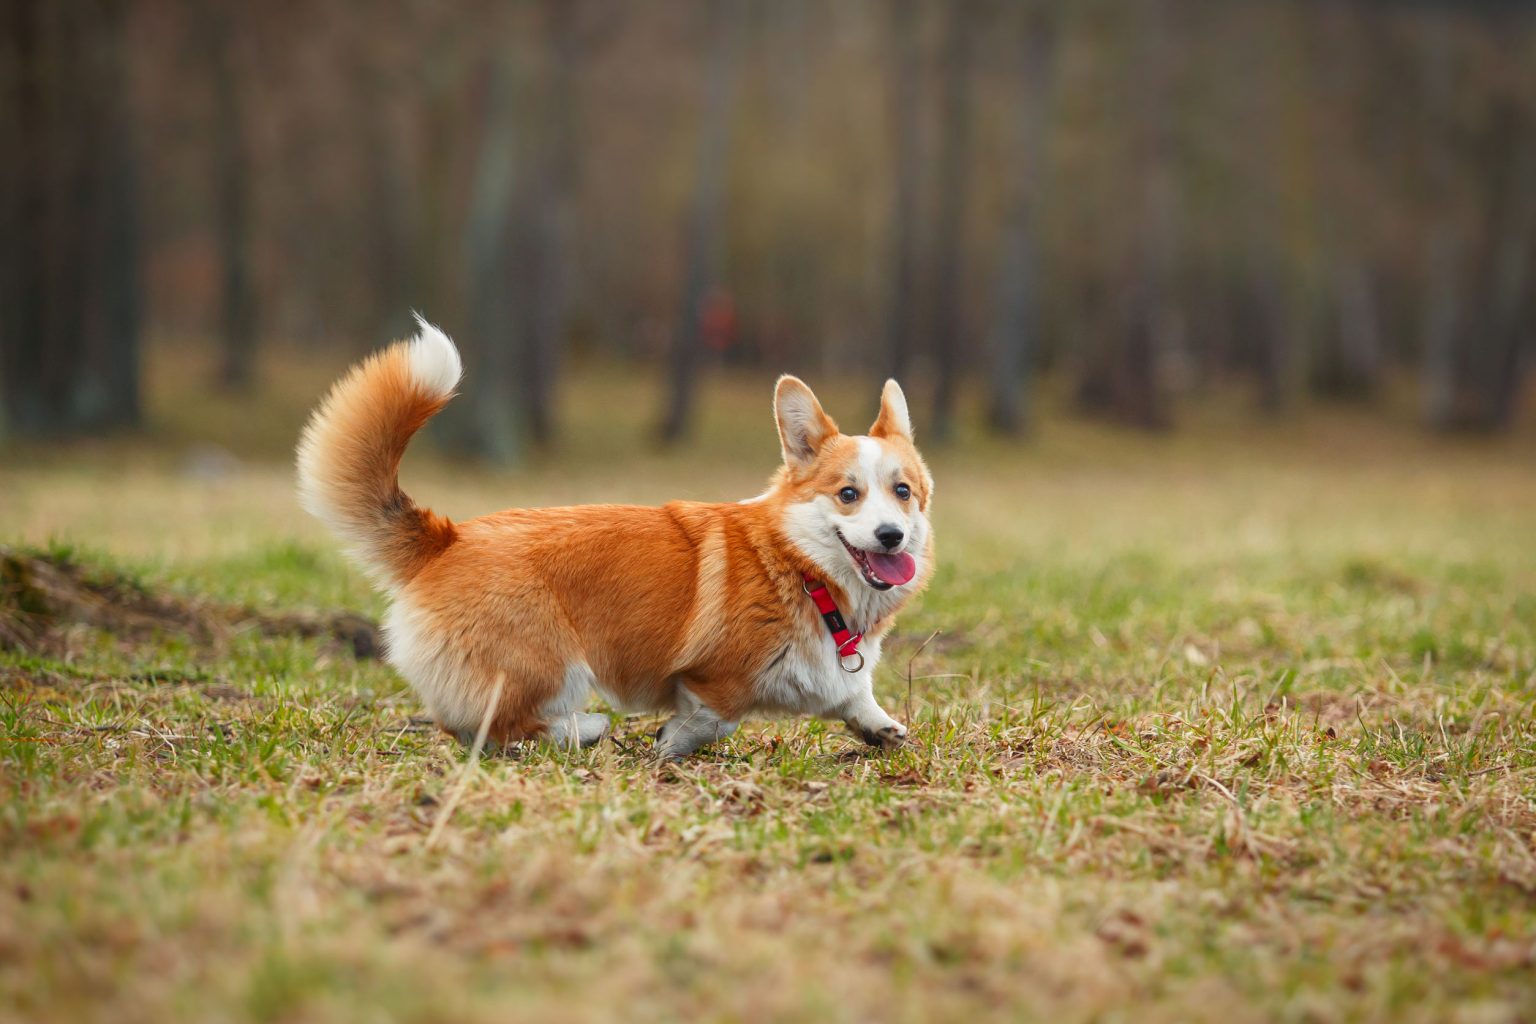 30 Different Types of Dog Breeds That Start With ‘C’